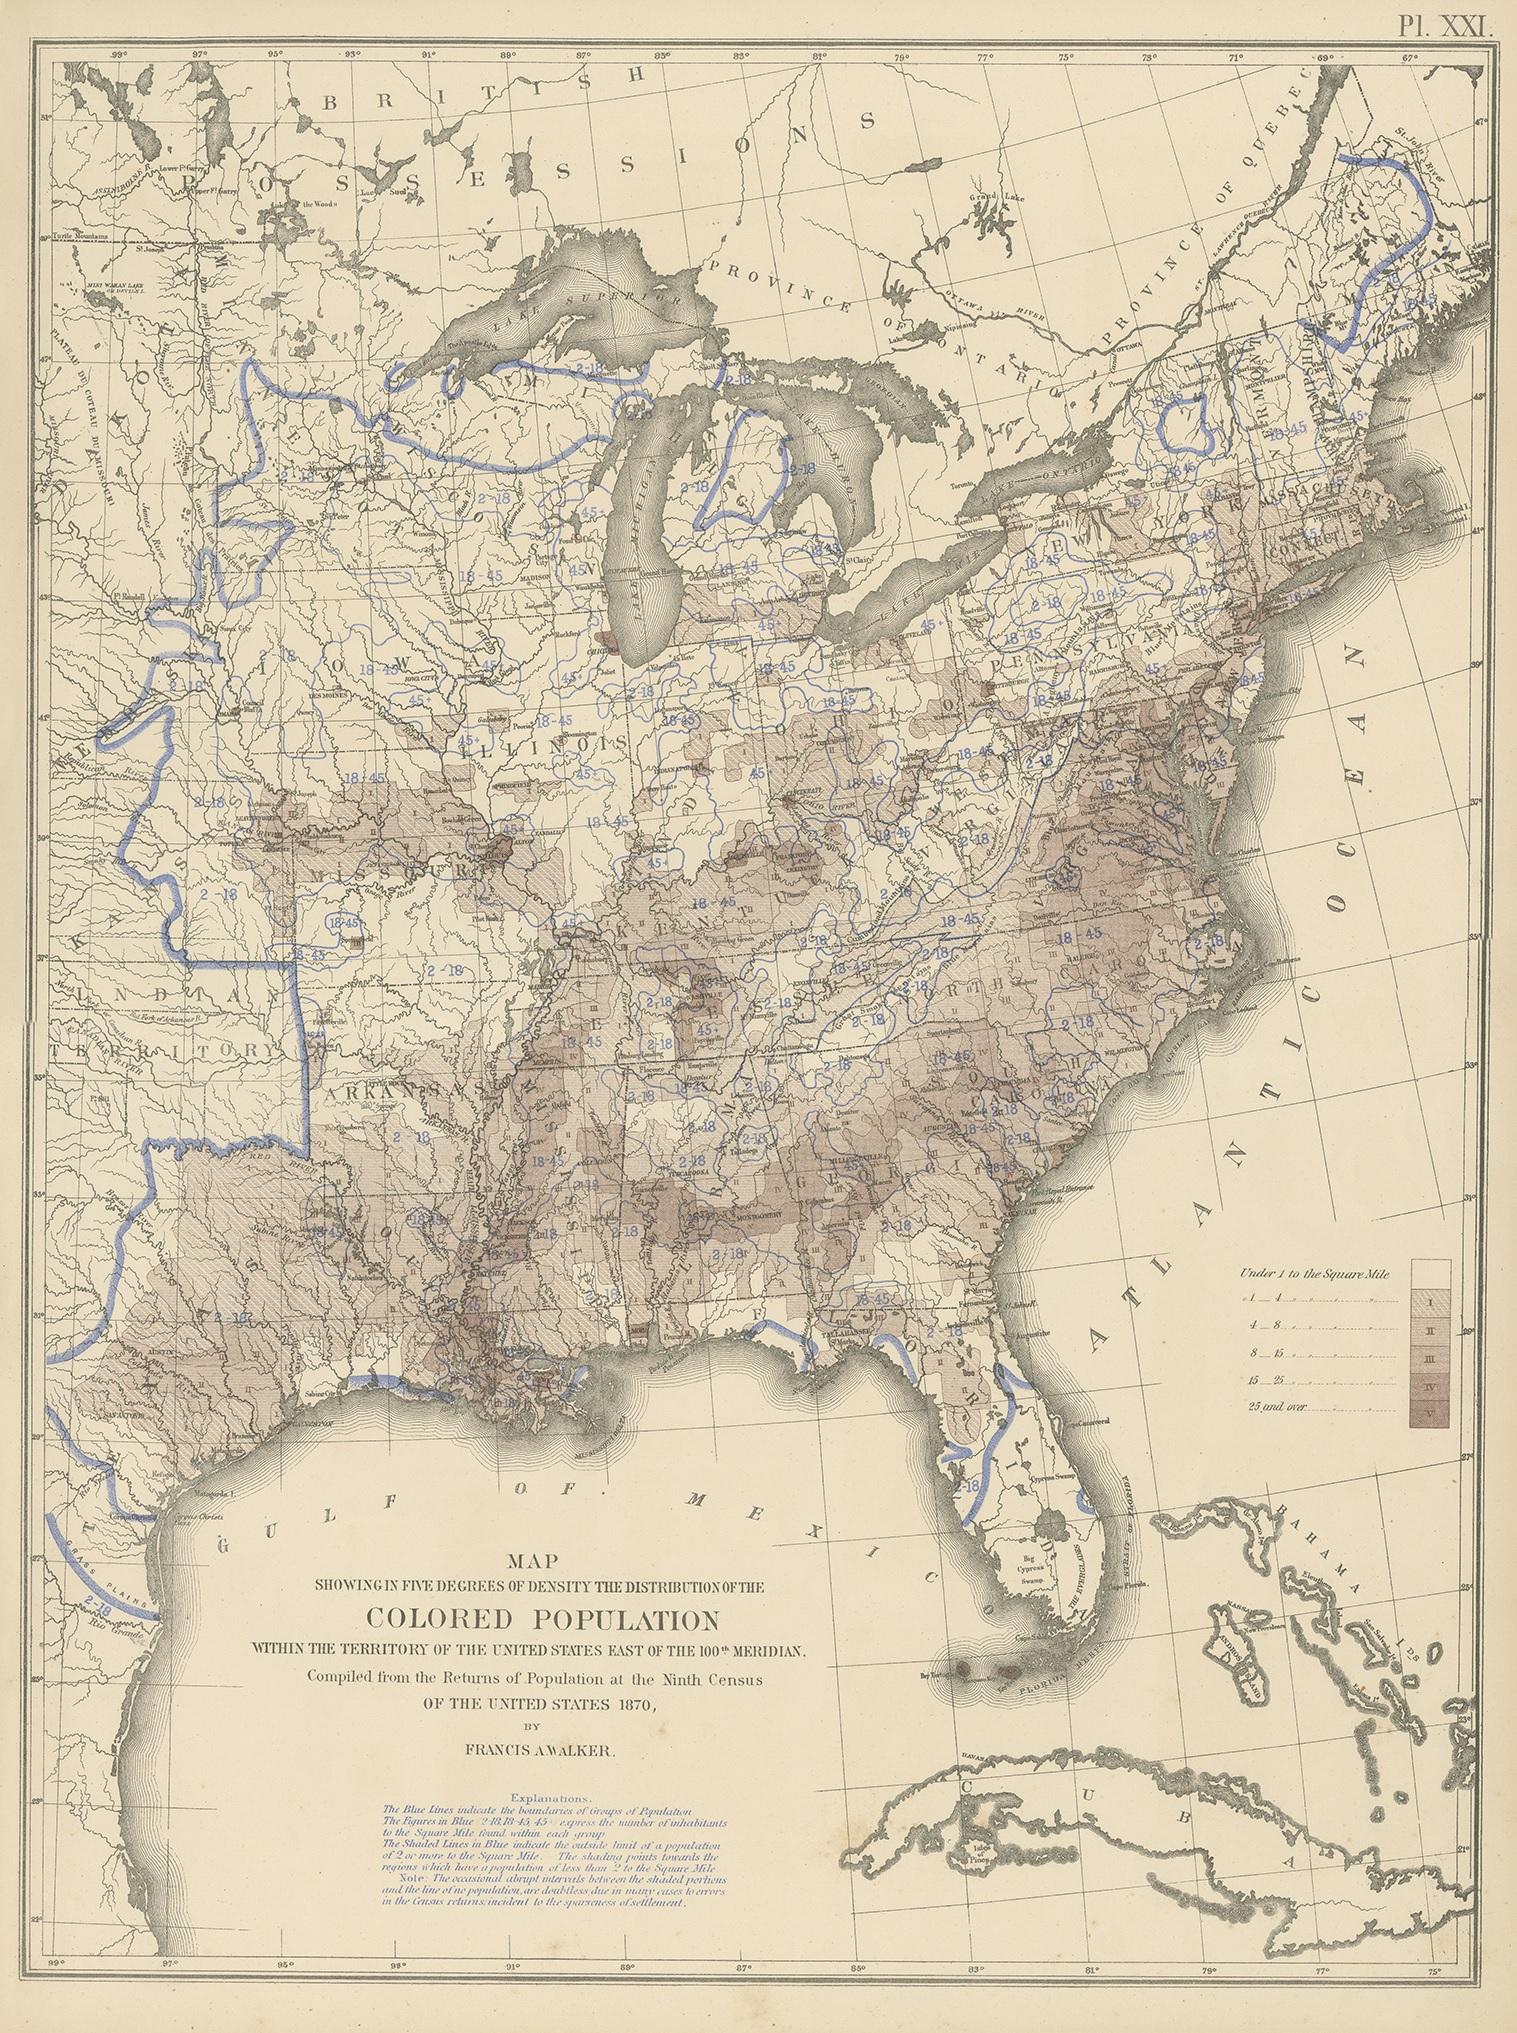 Antique chart titled 'Map showing in five degrees of density the distribution of the colored population within the territory of the United States east of the 100th Meridian. Compiled from the returns of population at the ninth census of the United